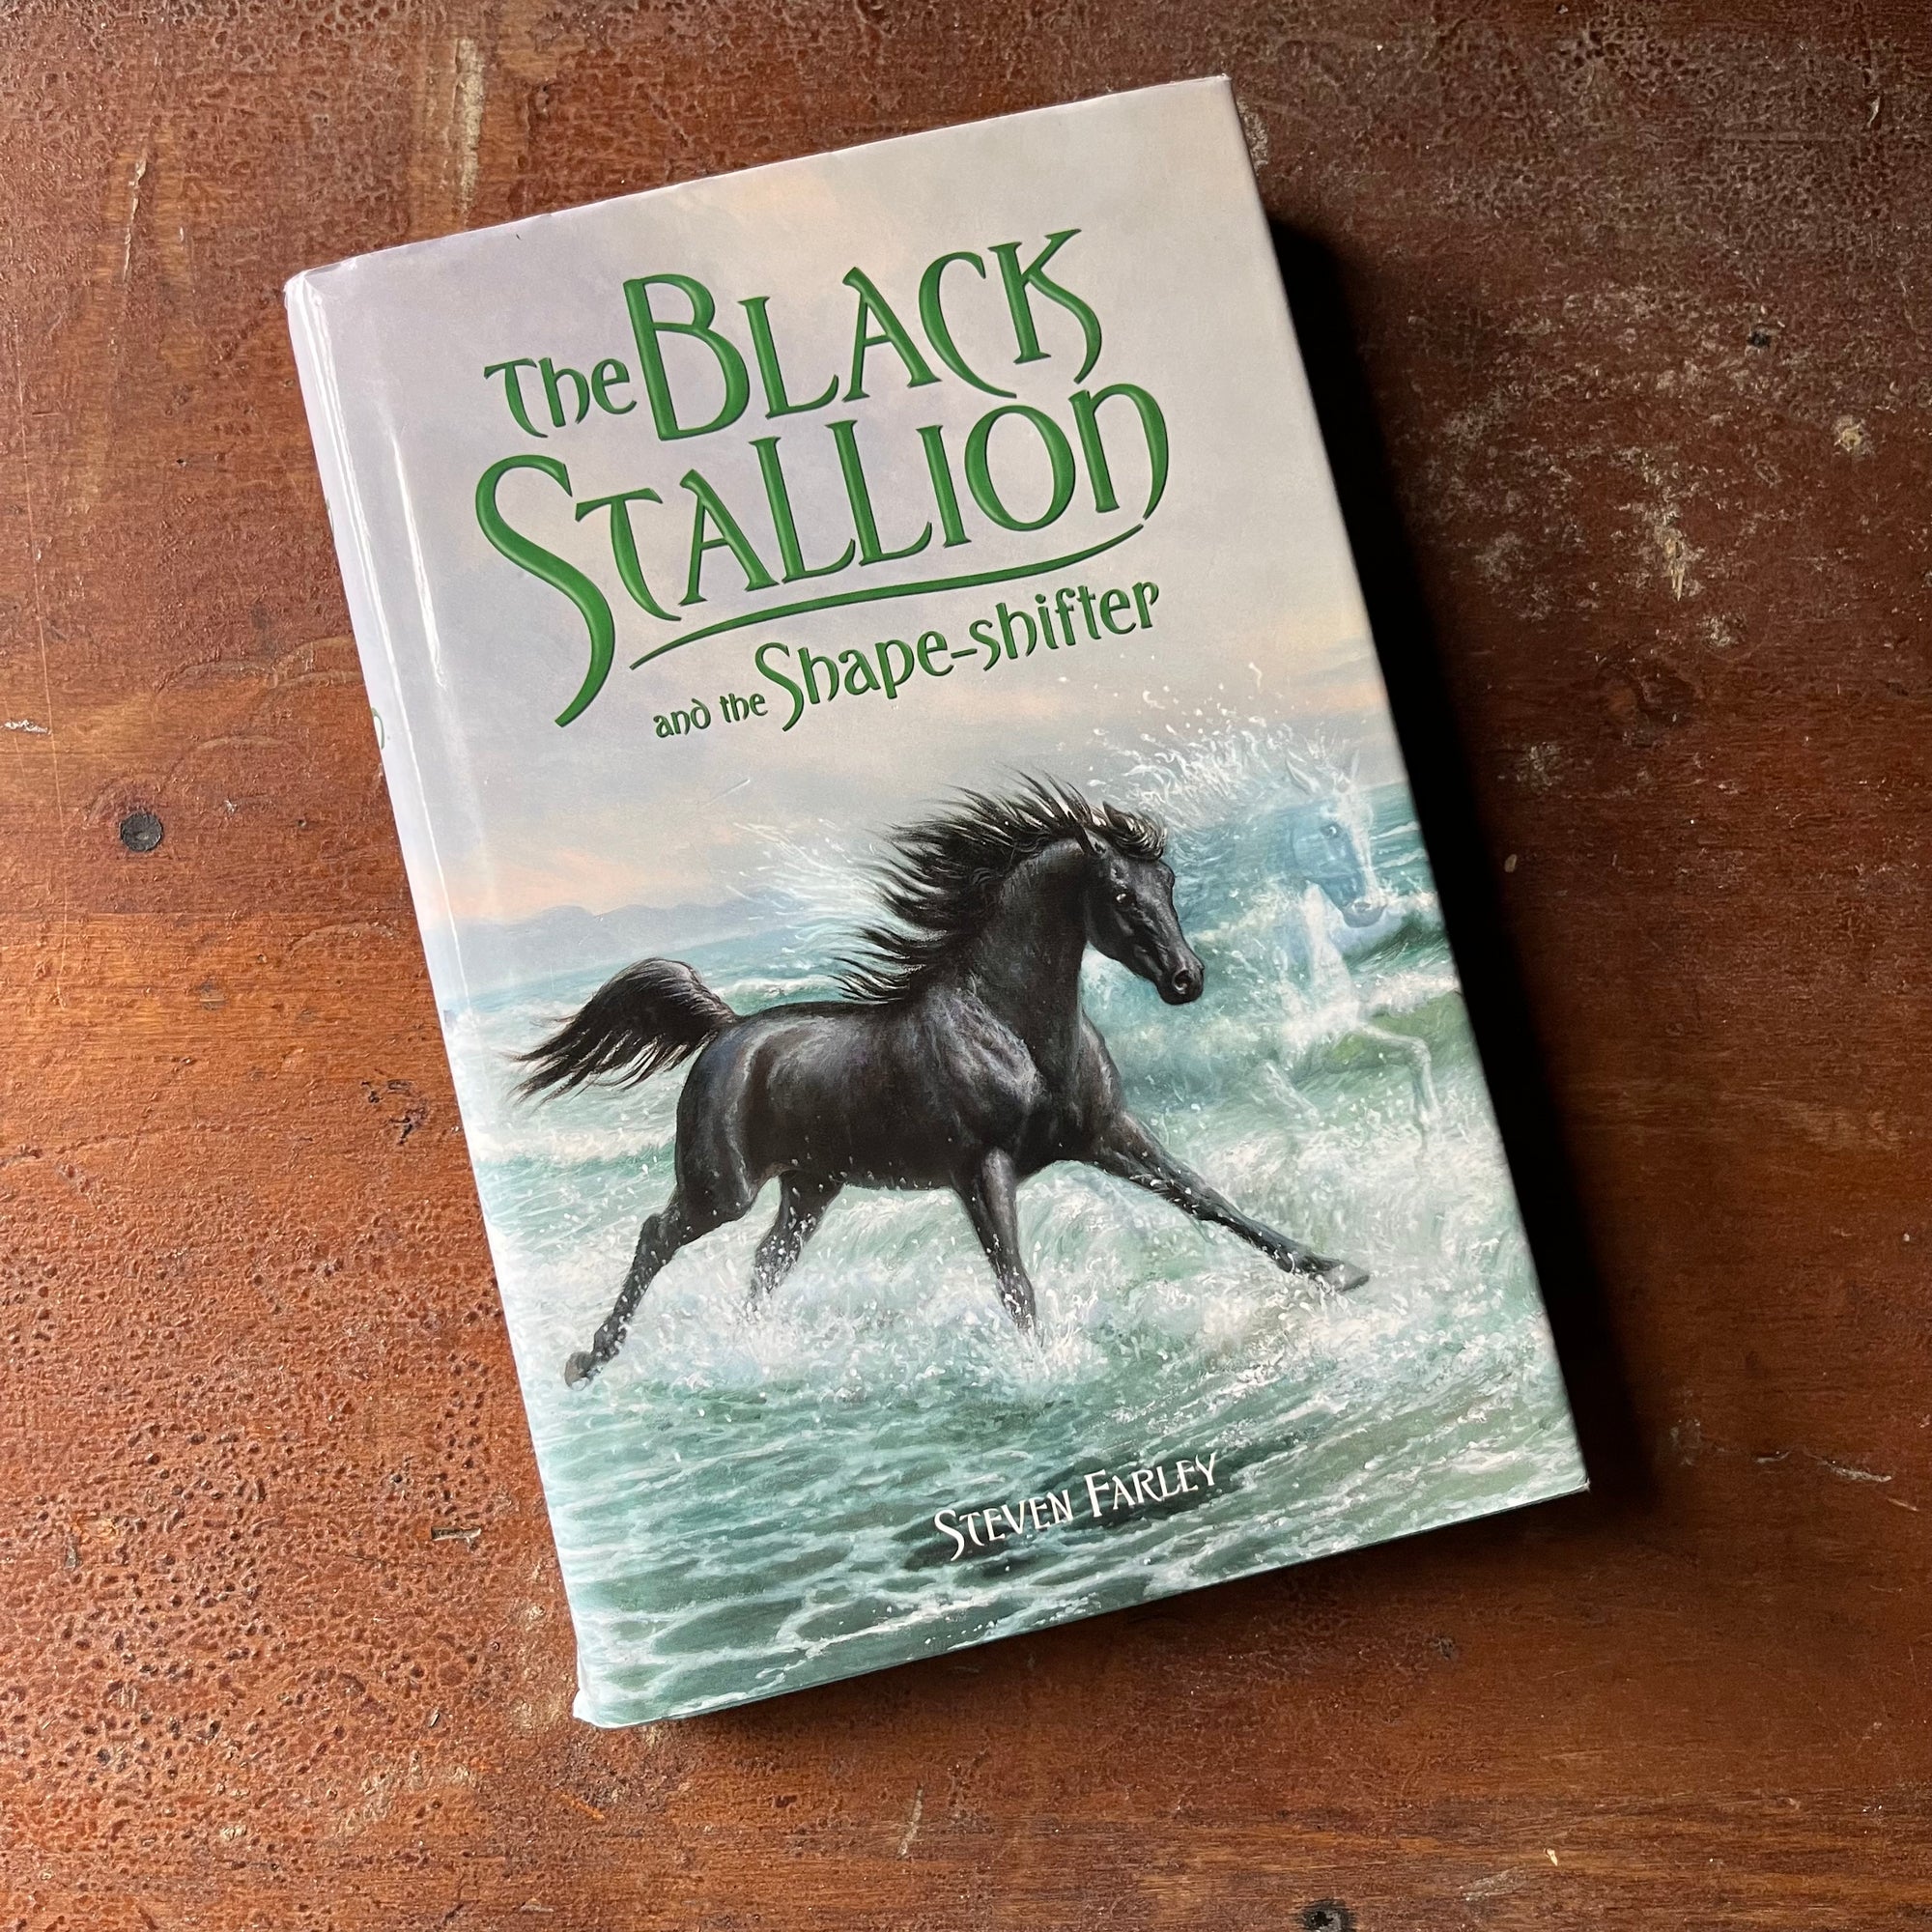 The Black Stallion Book Series, children's chapter book - The Black Stallion and the Shape Sifter by Stephen Farley (the son of Walter Farley) - view of the dust jacket's front cover